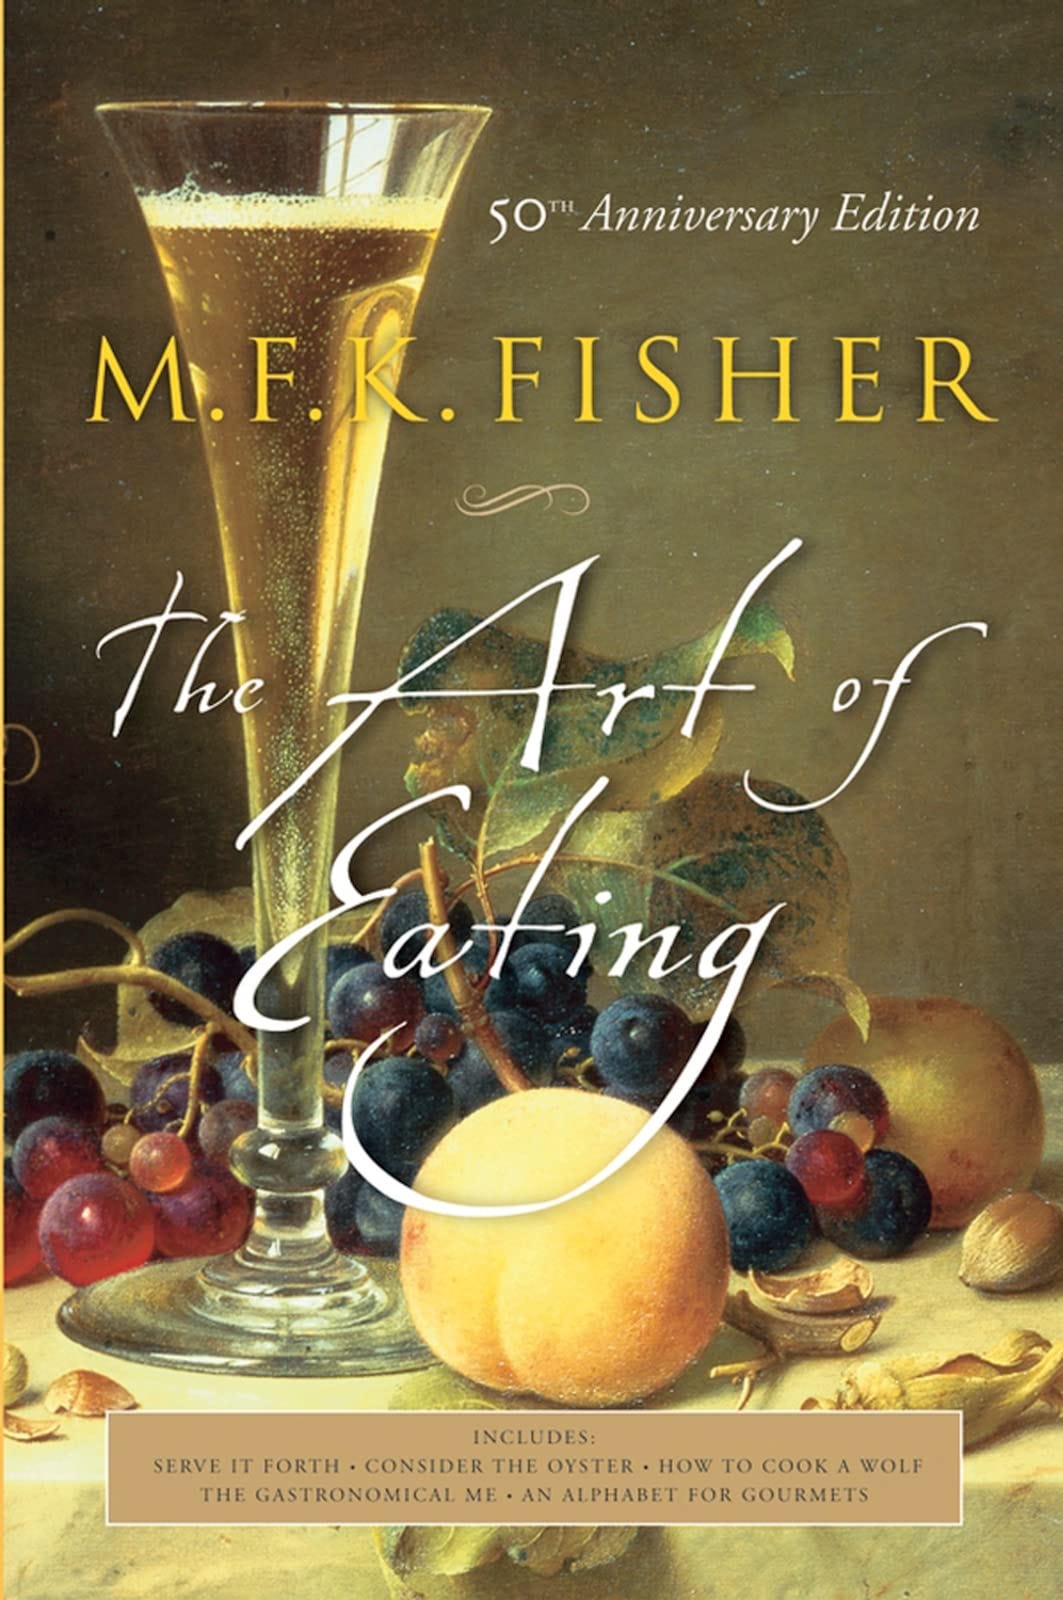 Cover of THE ART OF EATING. A glass of champagne with grapes, a peach, cracked nut shells.